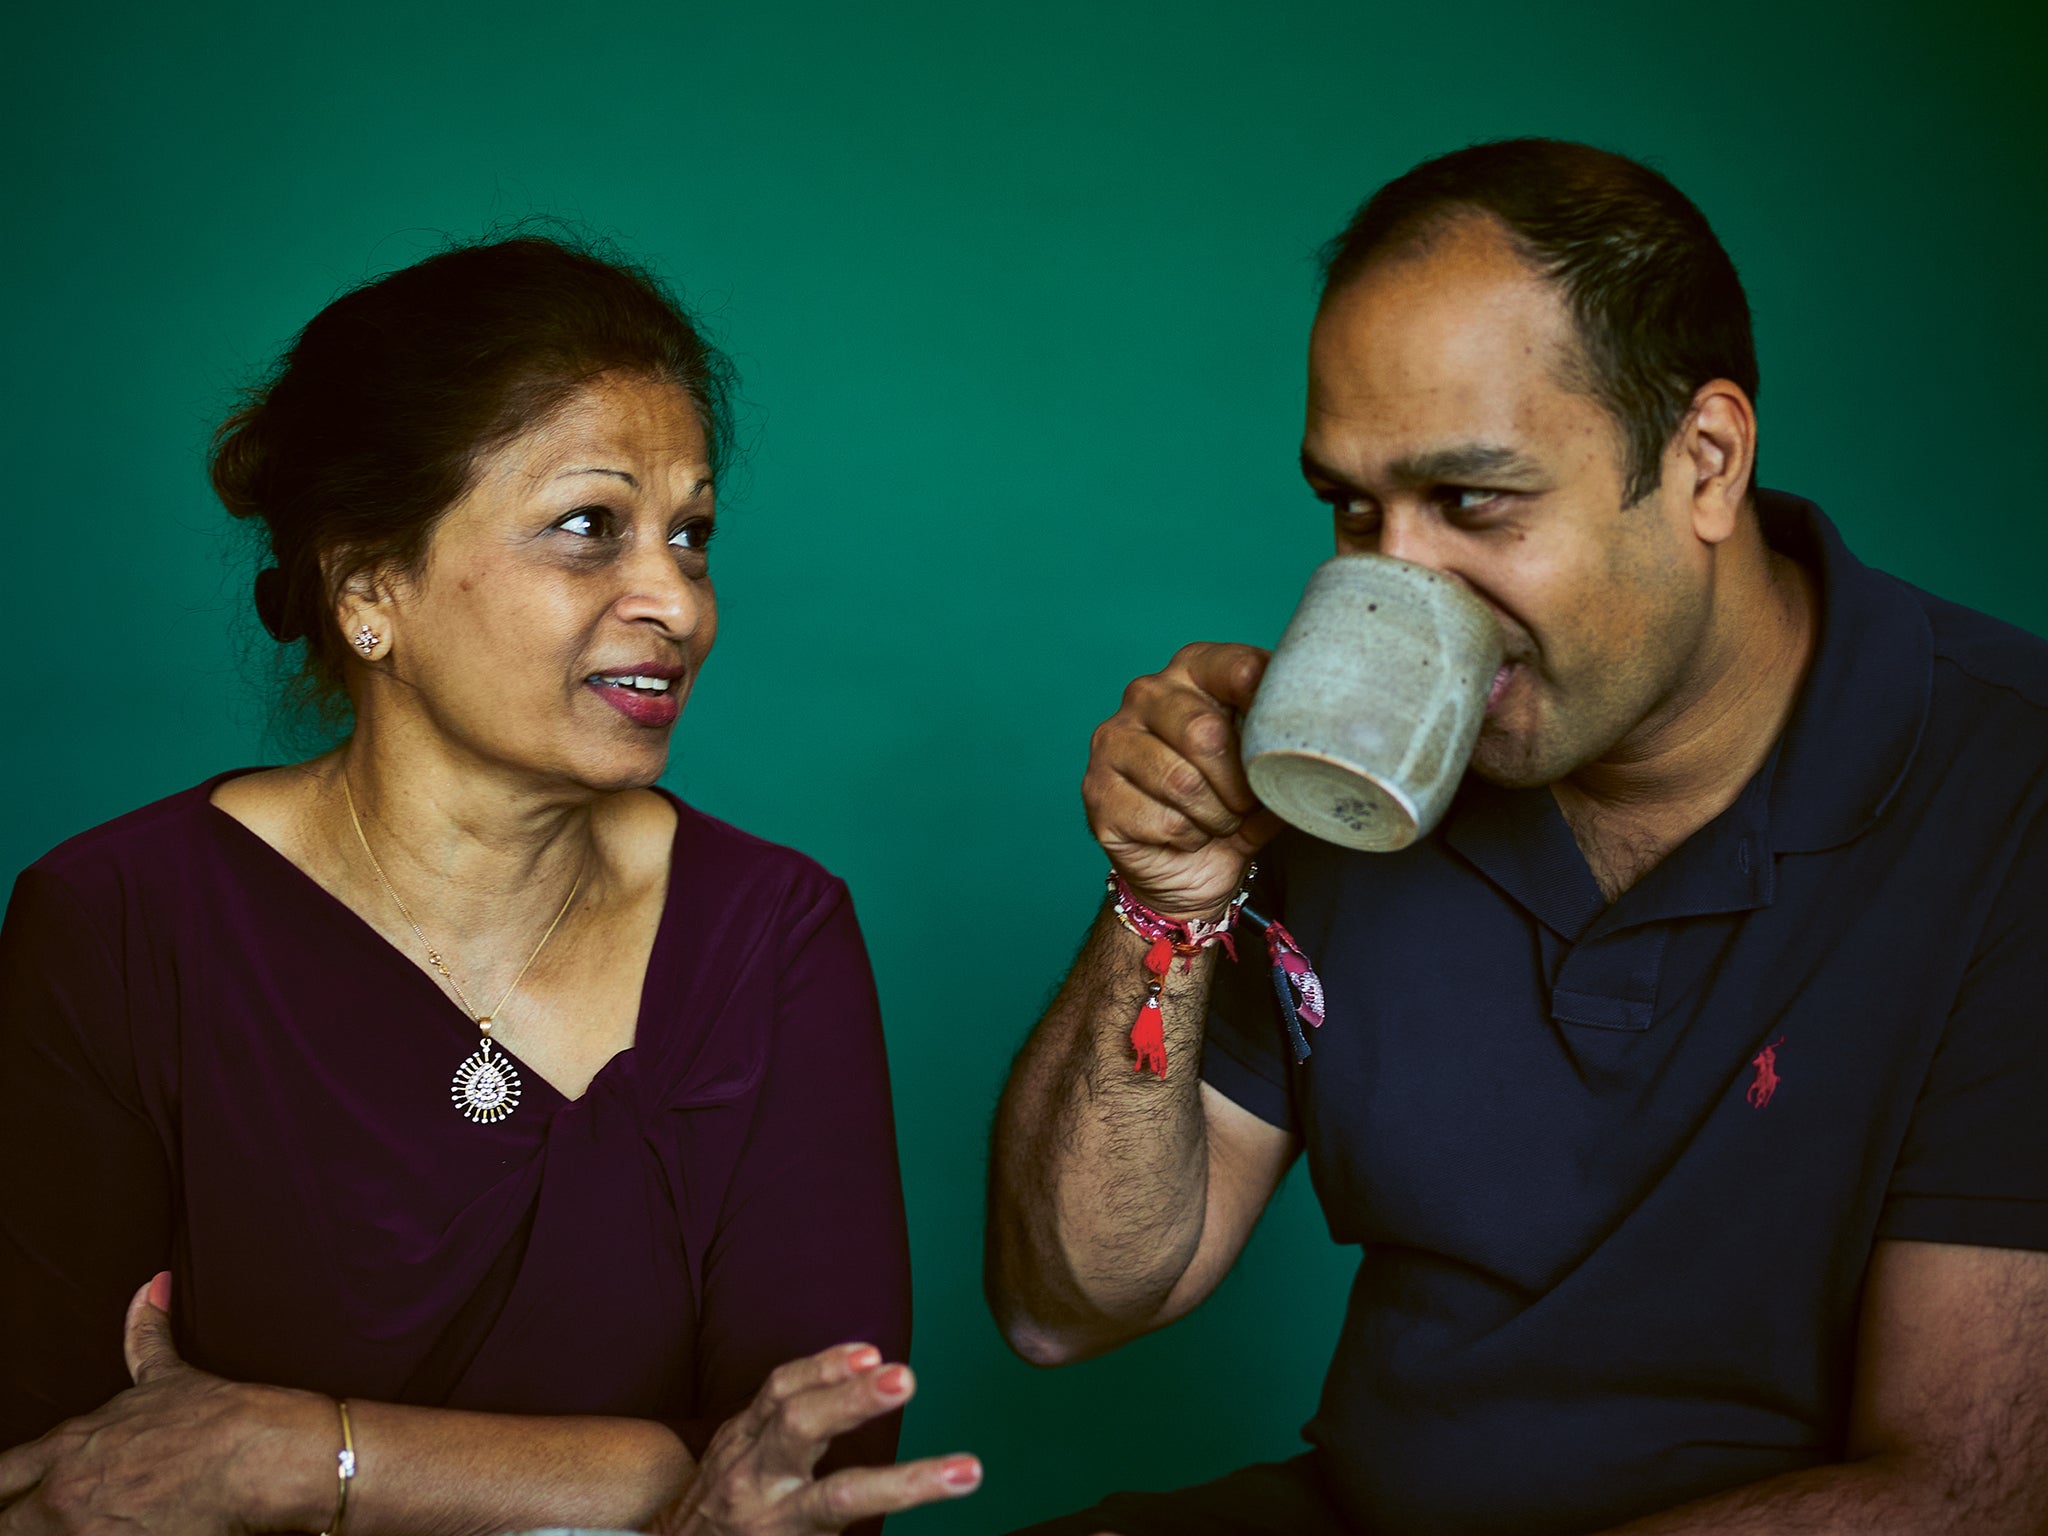 Aggarwal has been running Spice Kitchen with his mother Shashi for over a decade